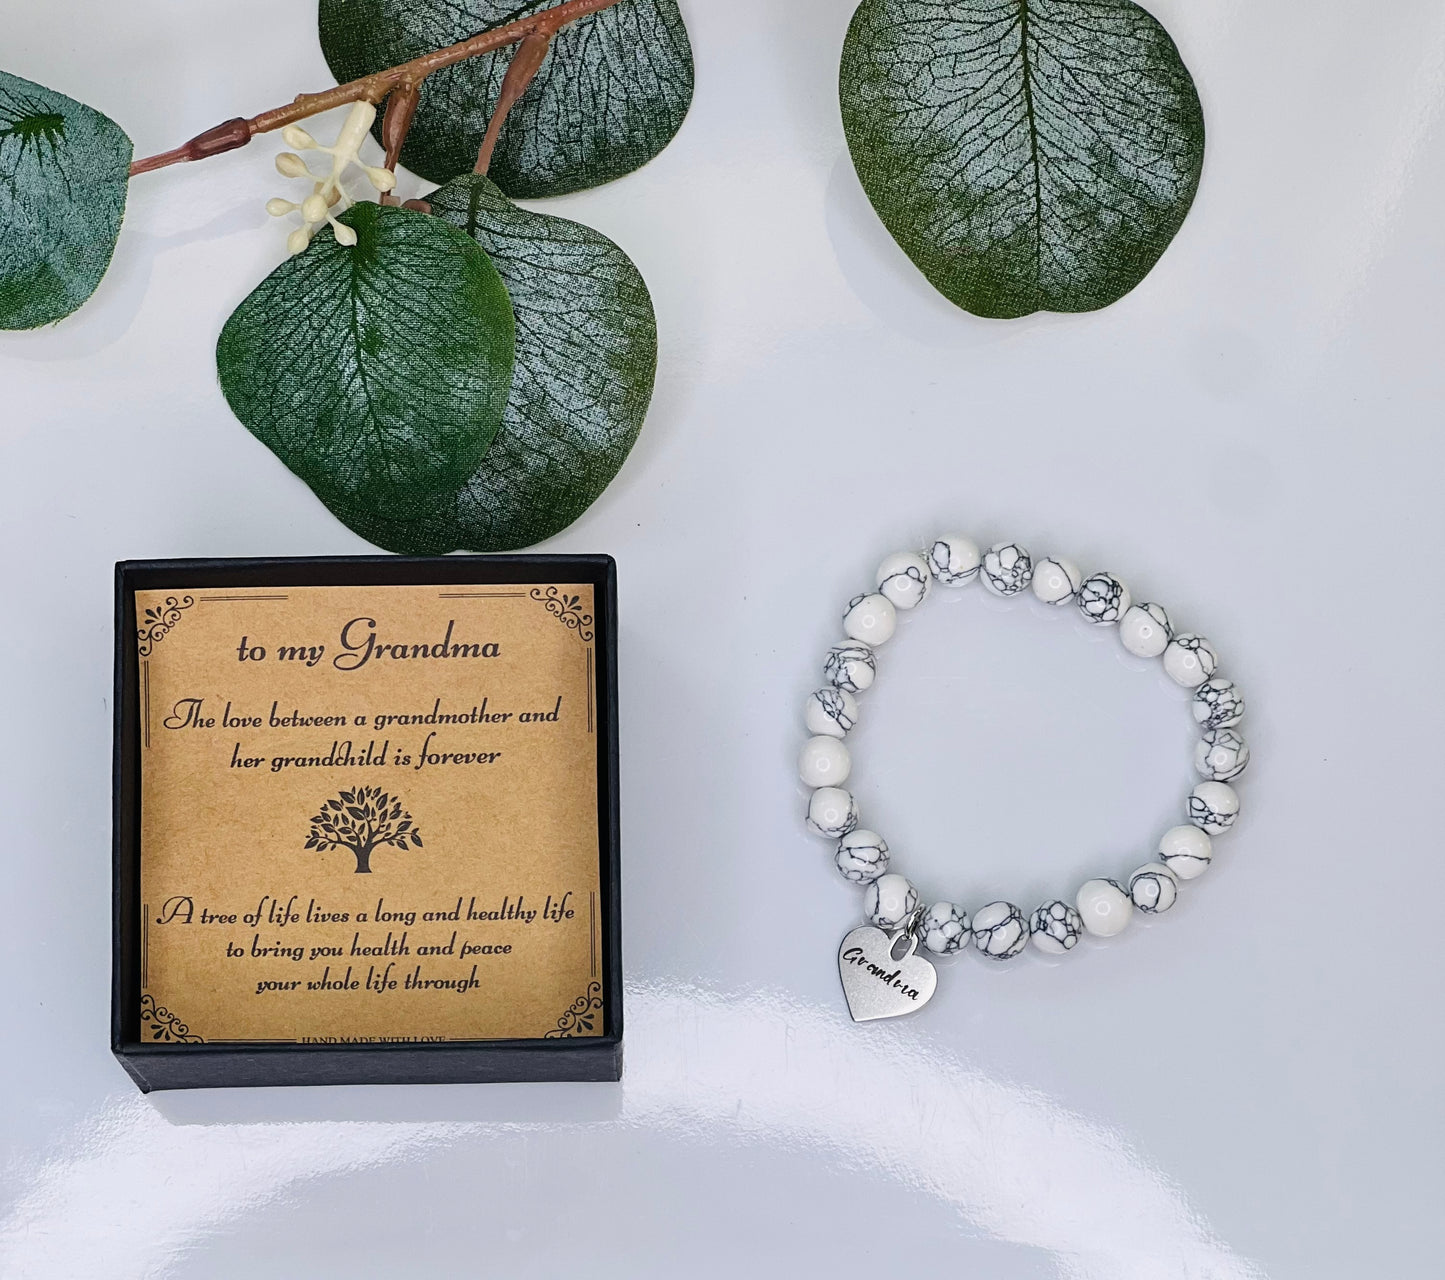 "To My Grandma" Natural Stone Bead Bracelet with Pendant and Card